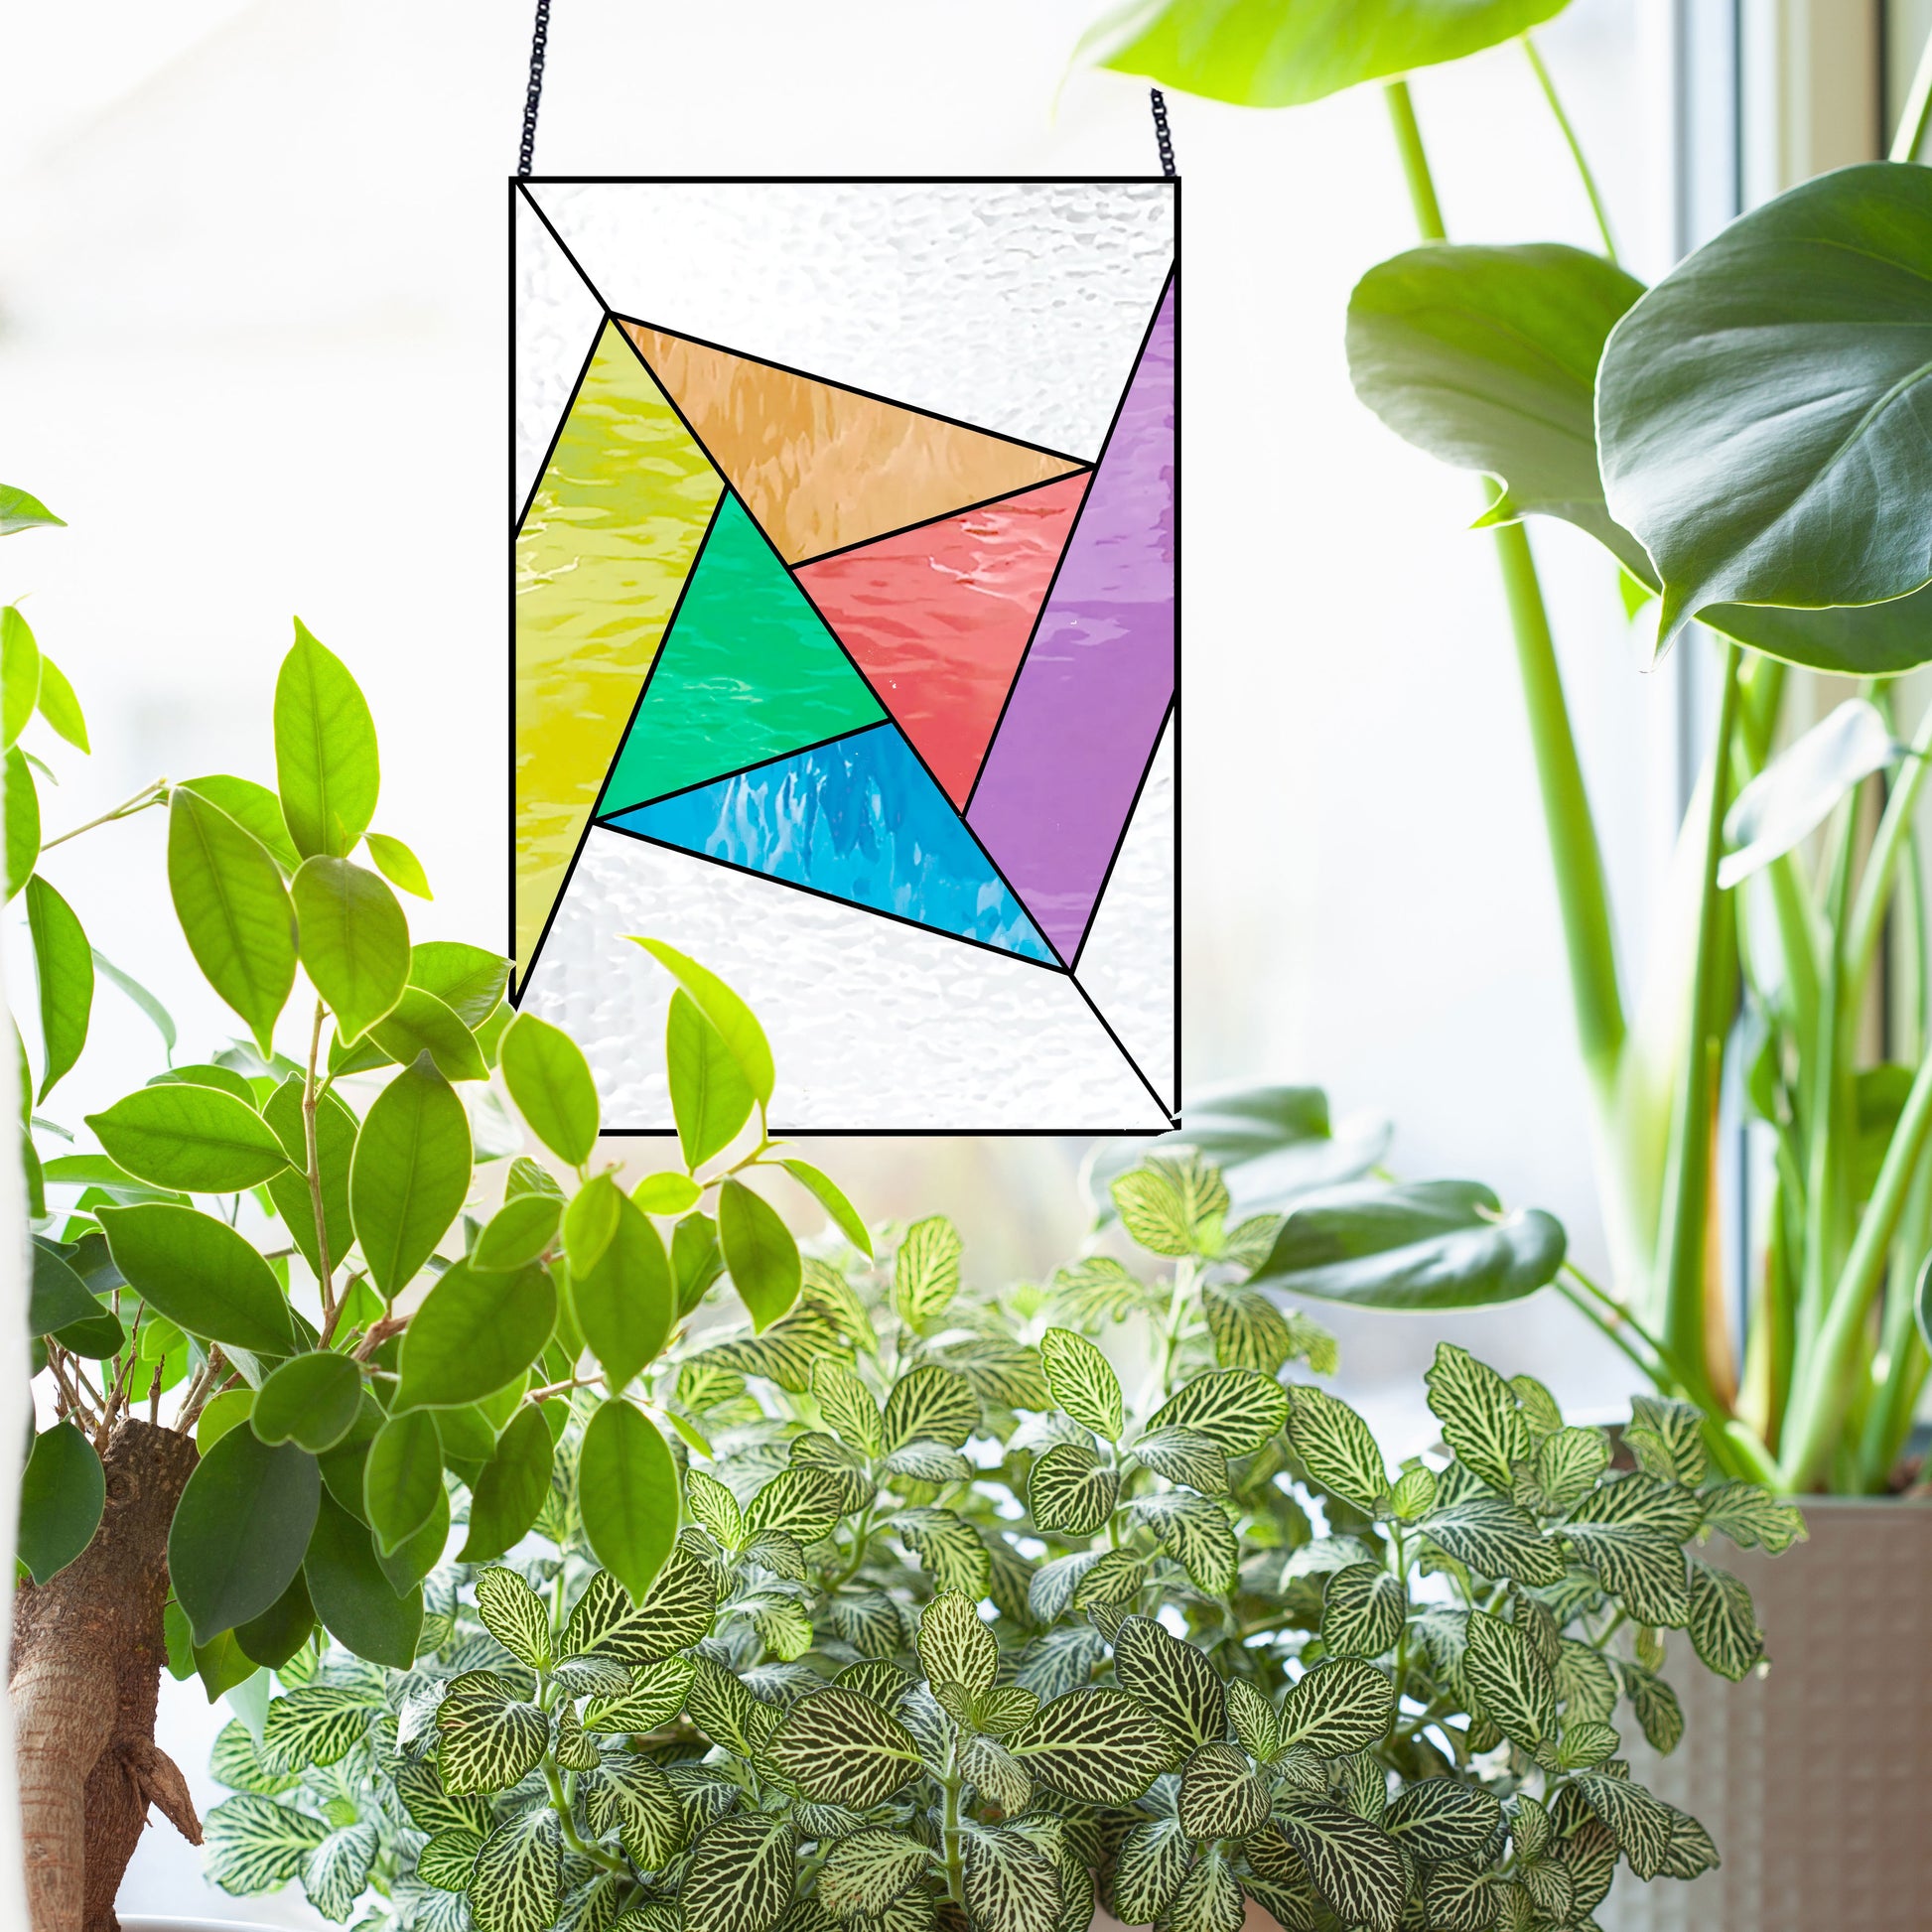 Beginner stained glass pattern of an abstract rainbow pinwheel, instant PDF download, shown hanging in a sunny window with plants